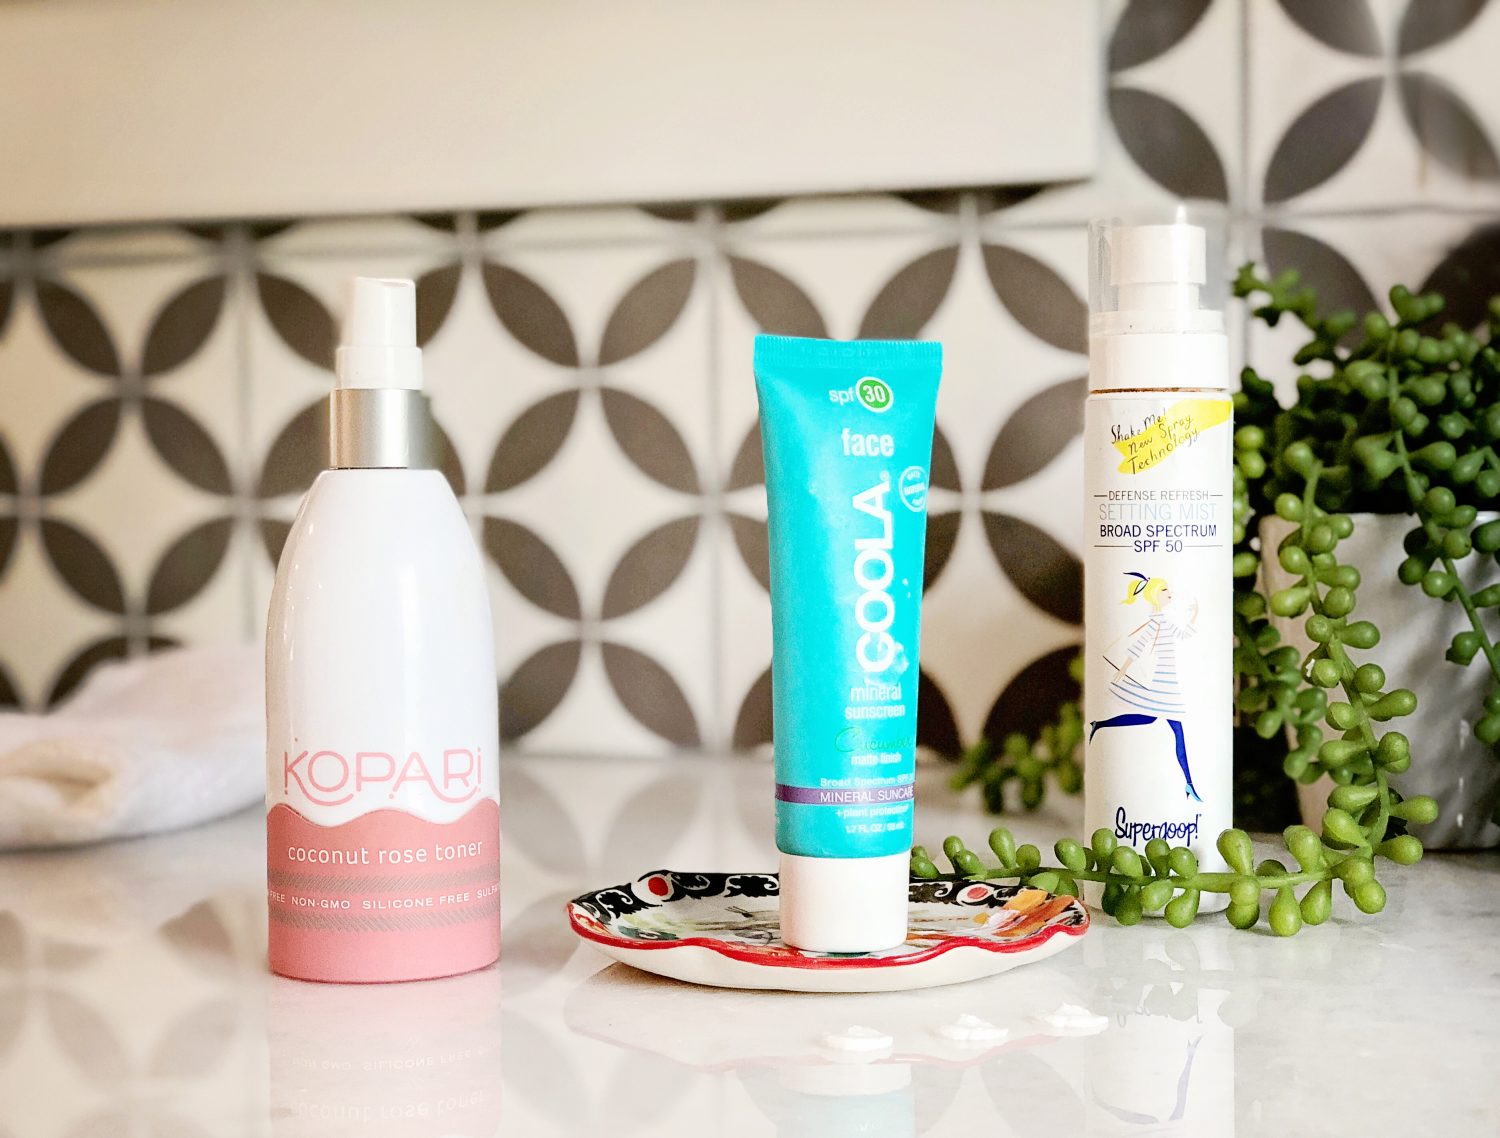 The motherchic summer skincare routine